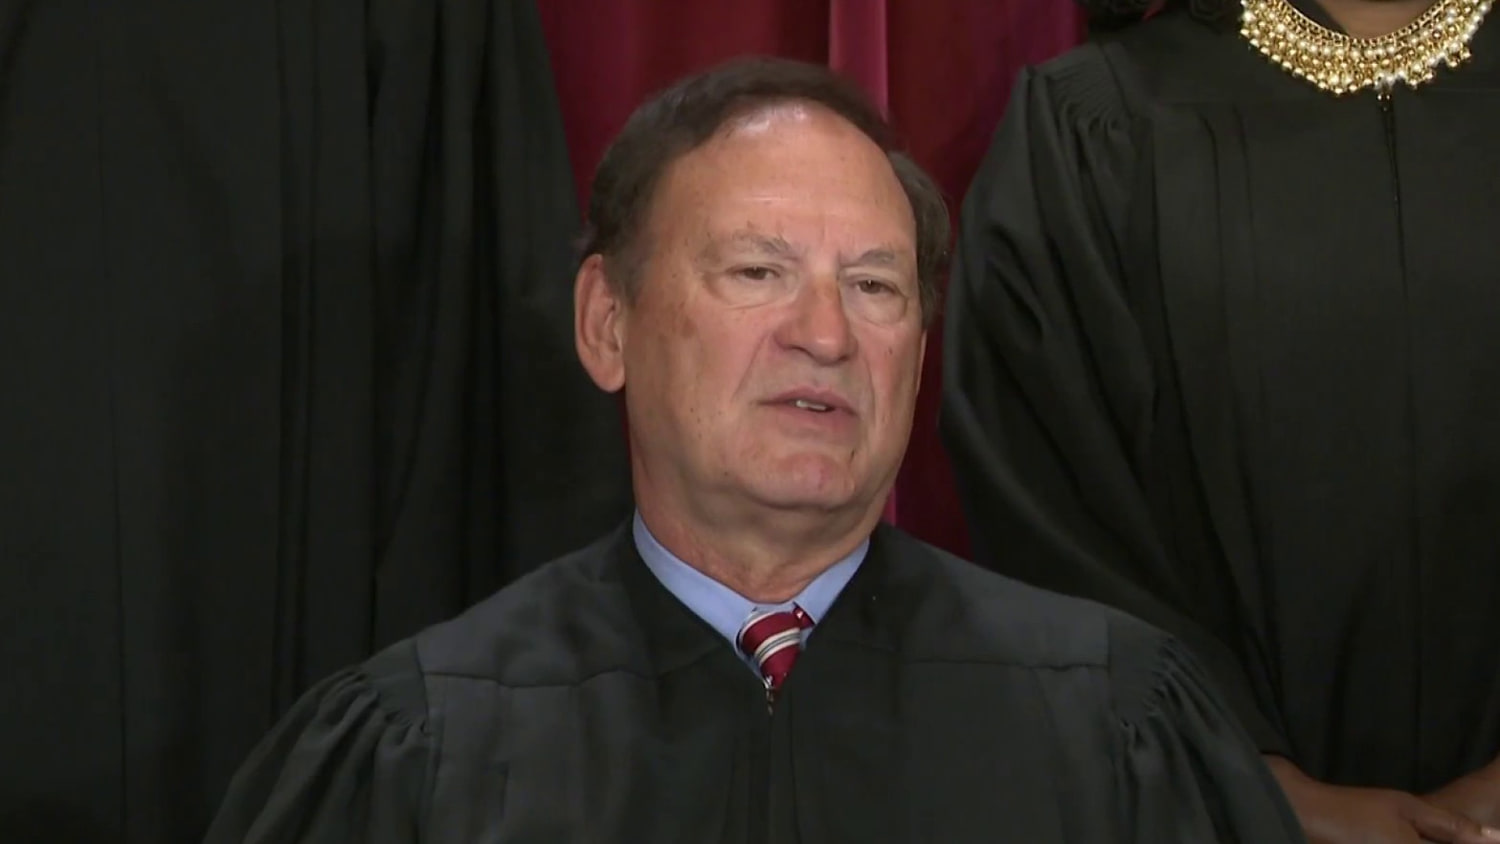 Photo of upside-down American flag at Justice Alito's home sparks controversy